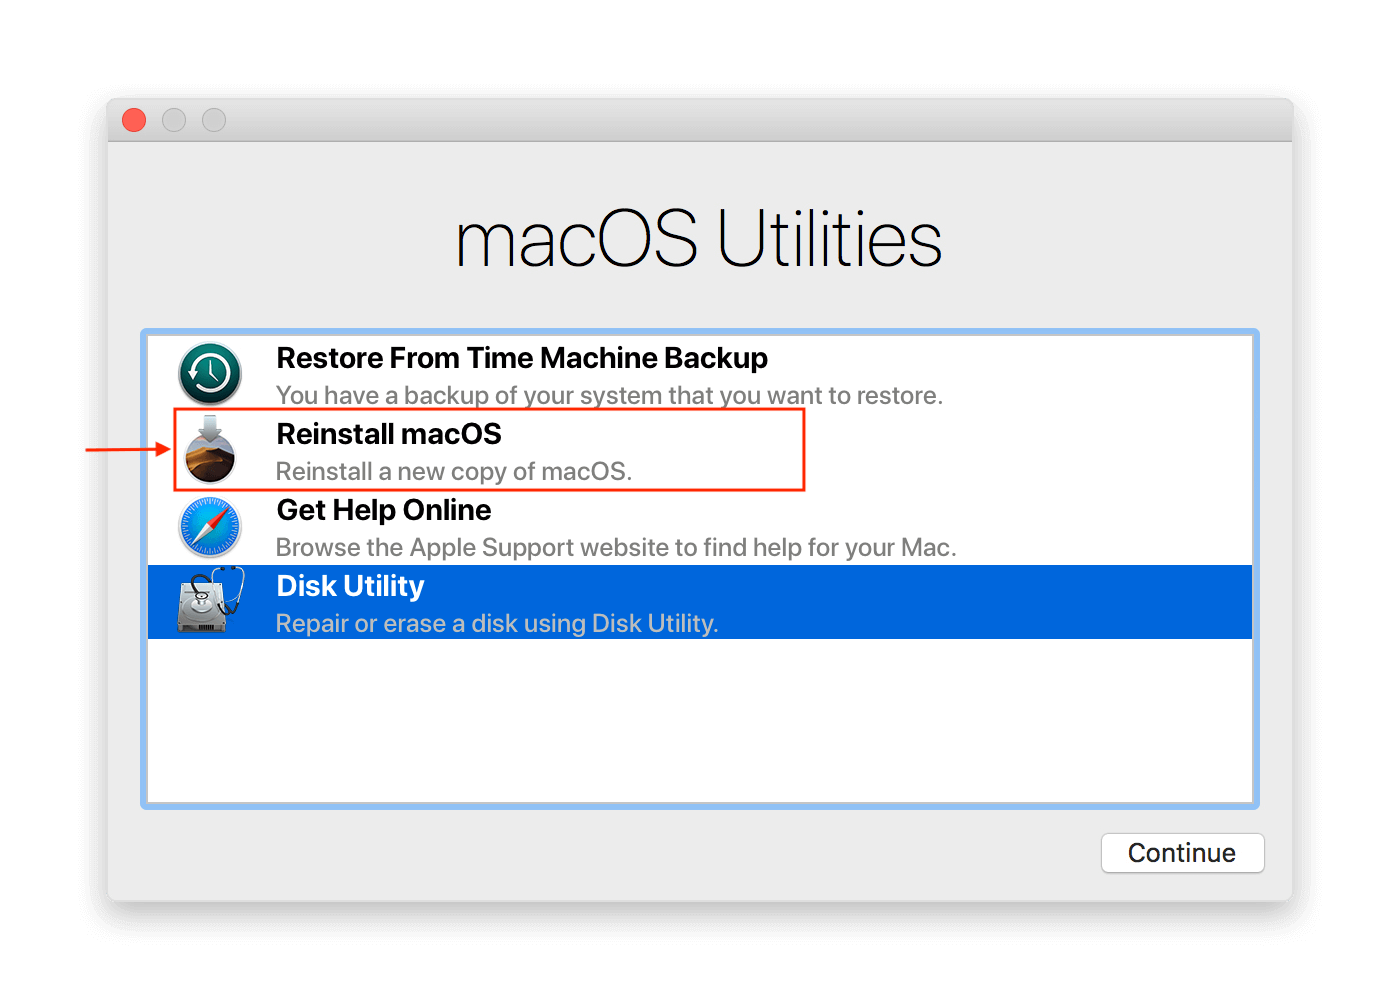 how to factory reset mac